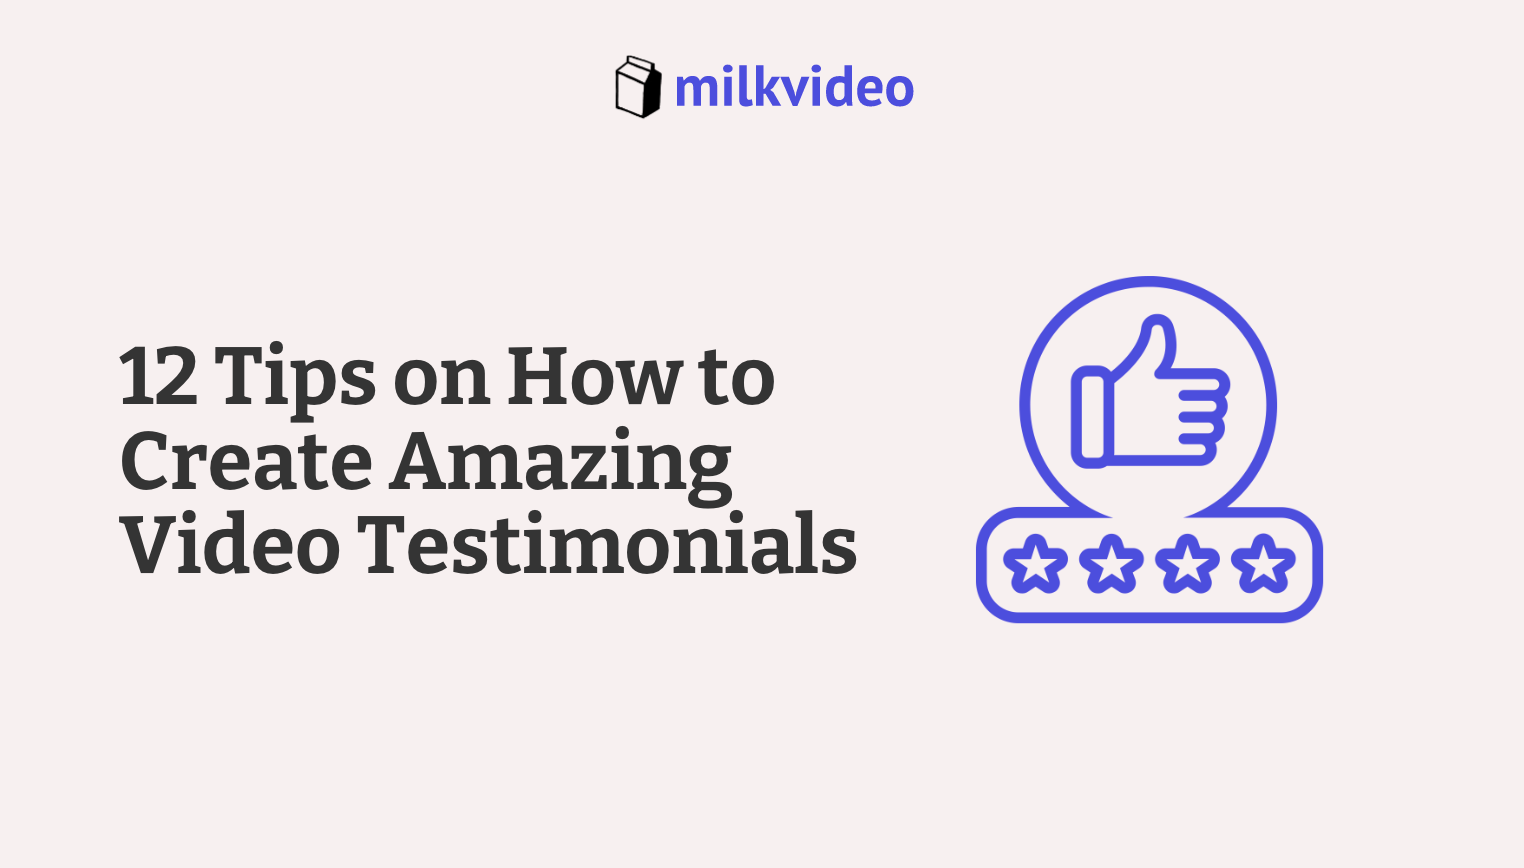 12 Tips on How to Create Amazing Video Testimonials